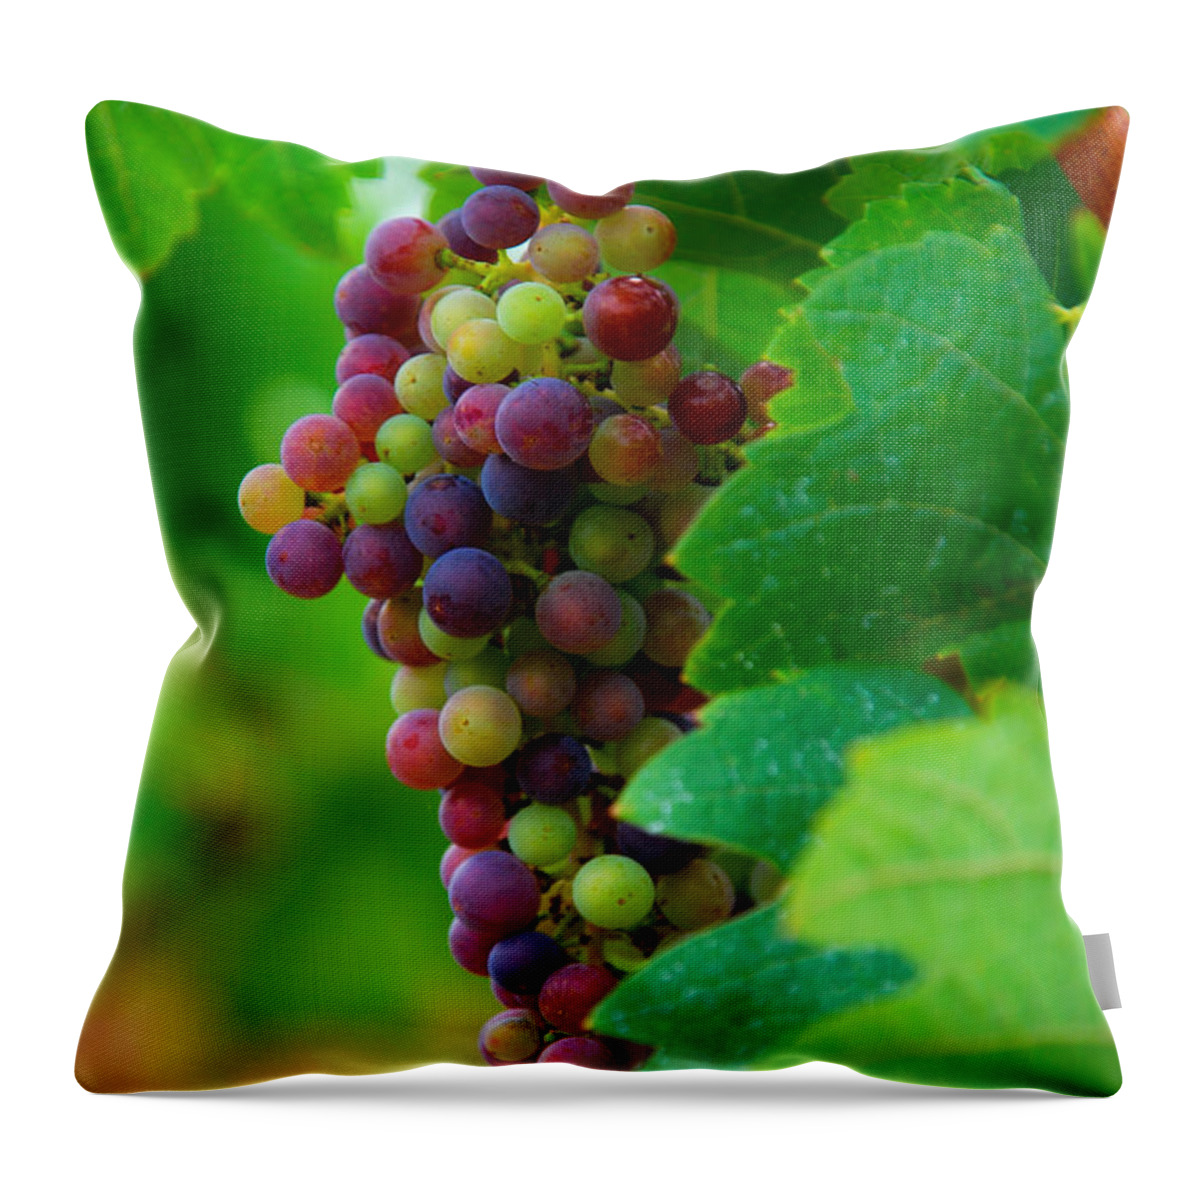 Bordeaux Throw Pillow featuring the photograph Red Grapes by Hannes Cmarits